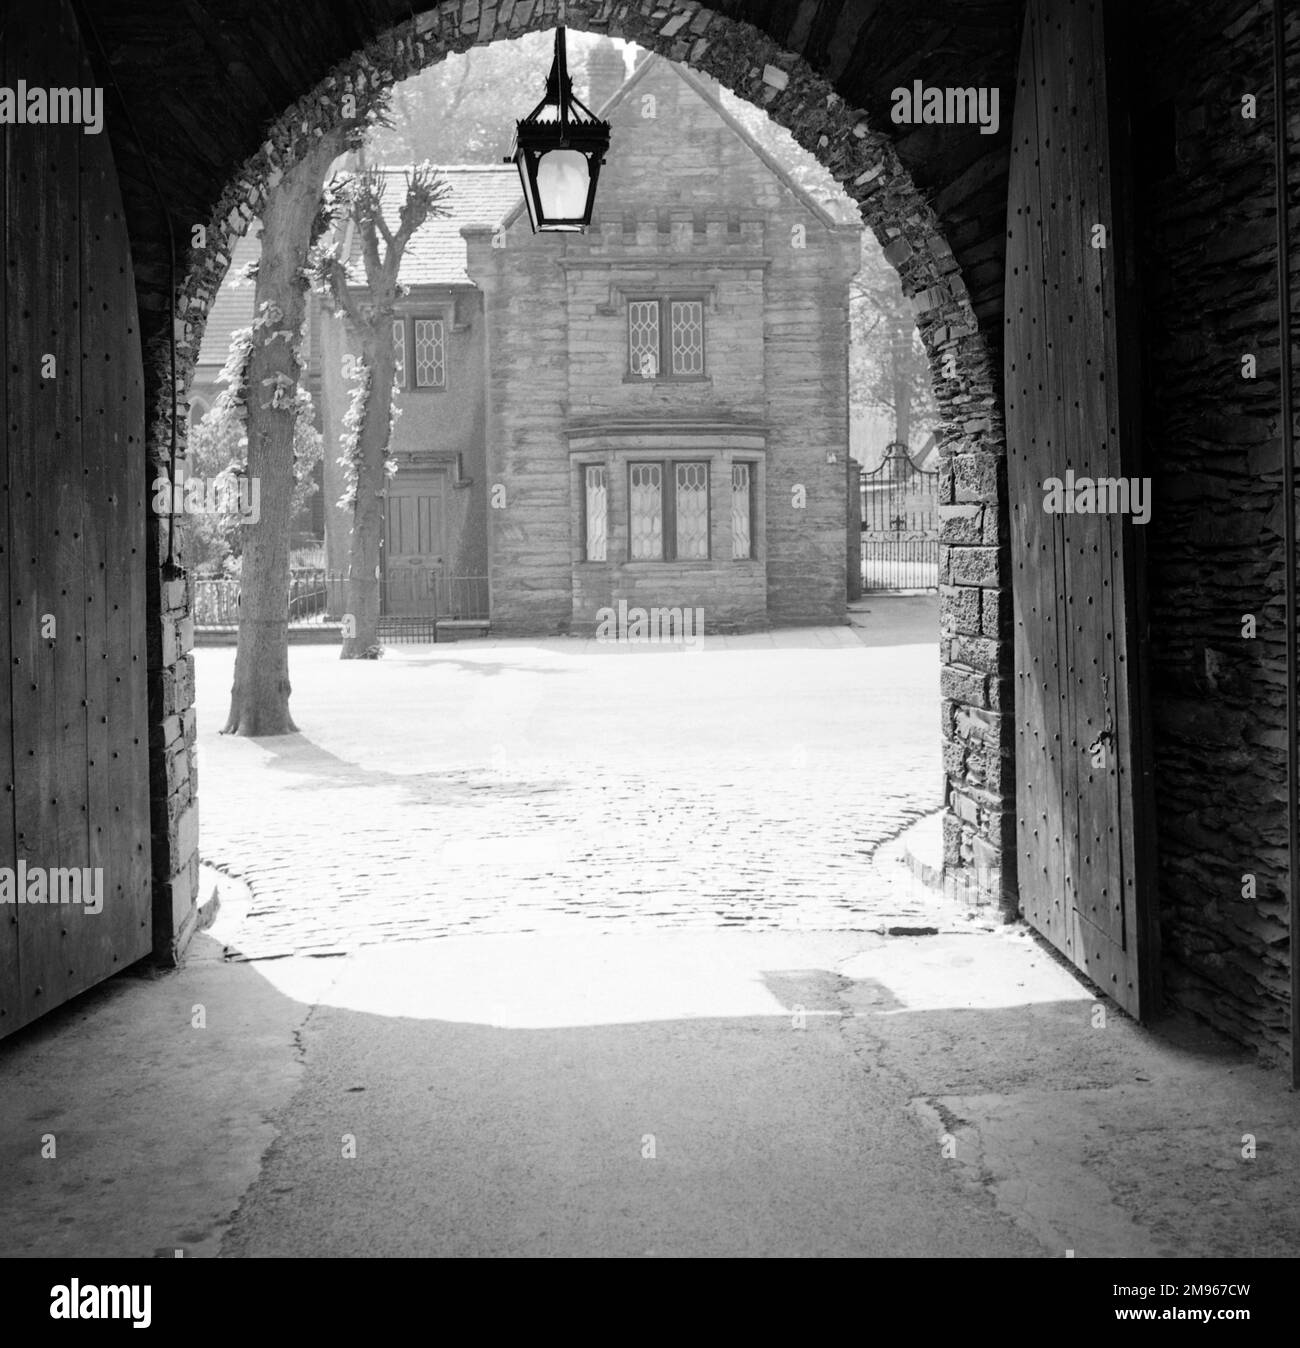 An open gateway with a fine gas lamp hanging at the point of the arch and two large wooden doors both opened fully. The open portal reveals a view though to an attractive small stone house in the sunshine. Photograph by Norman Synge Waller Budd Stock Photo